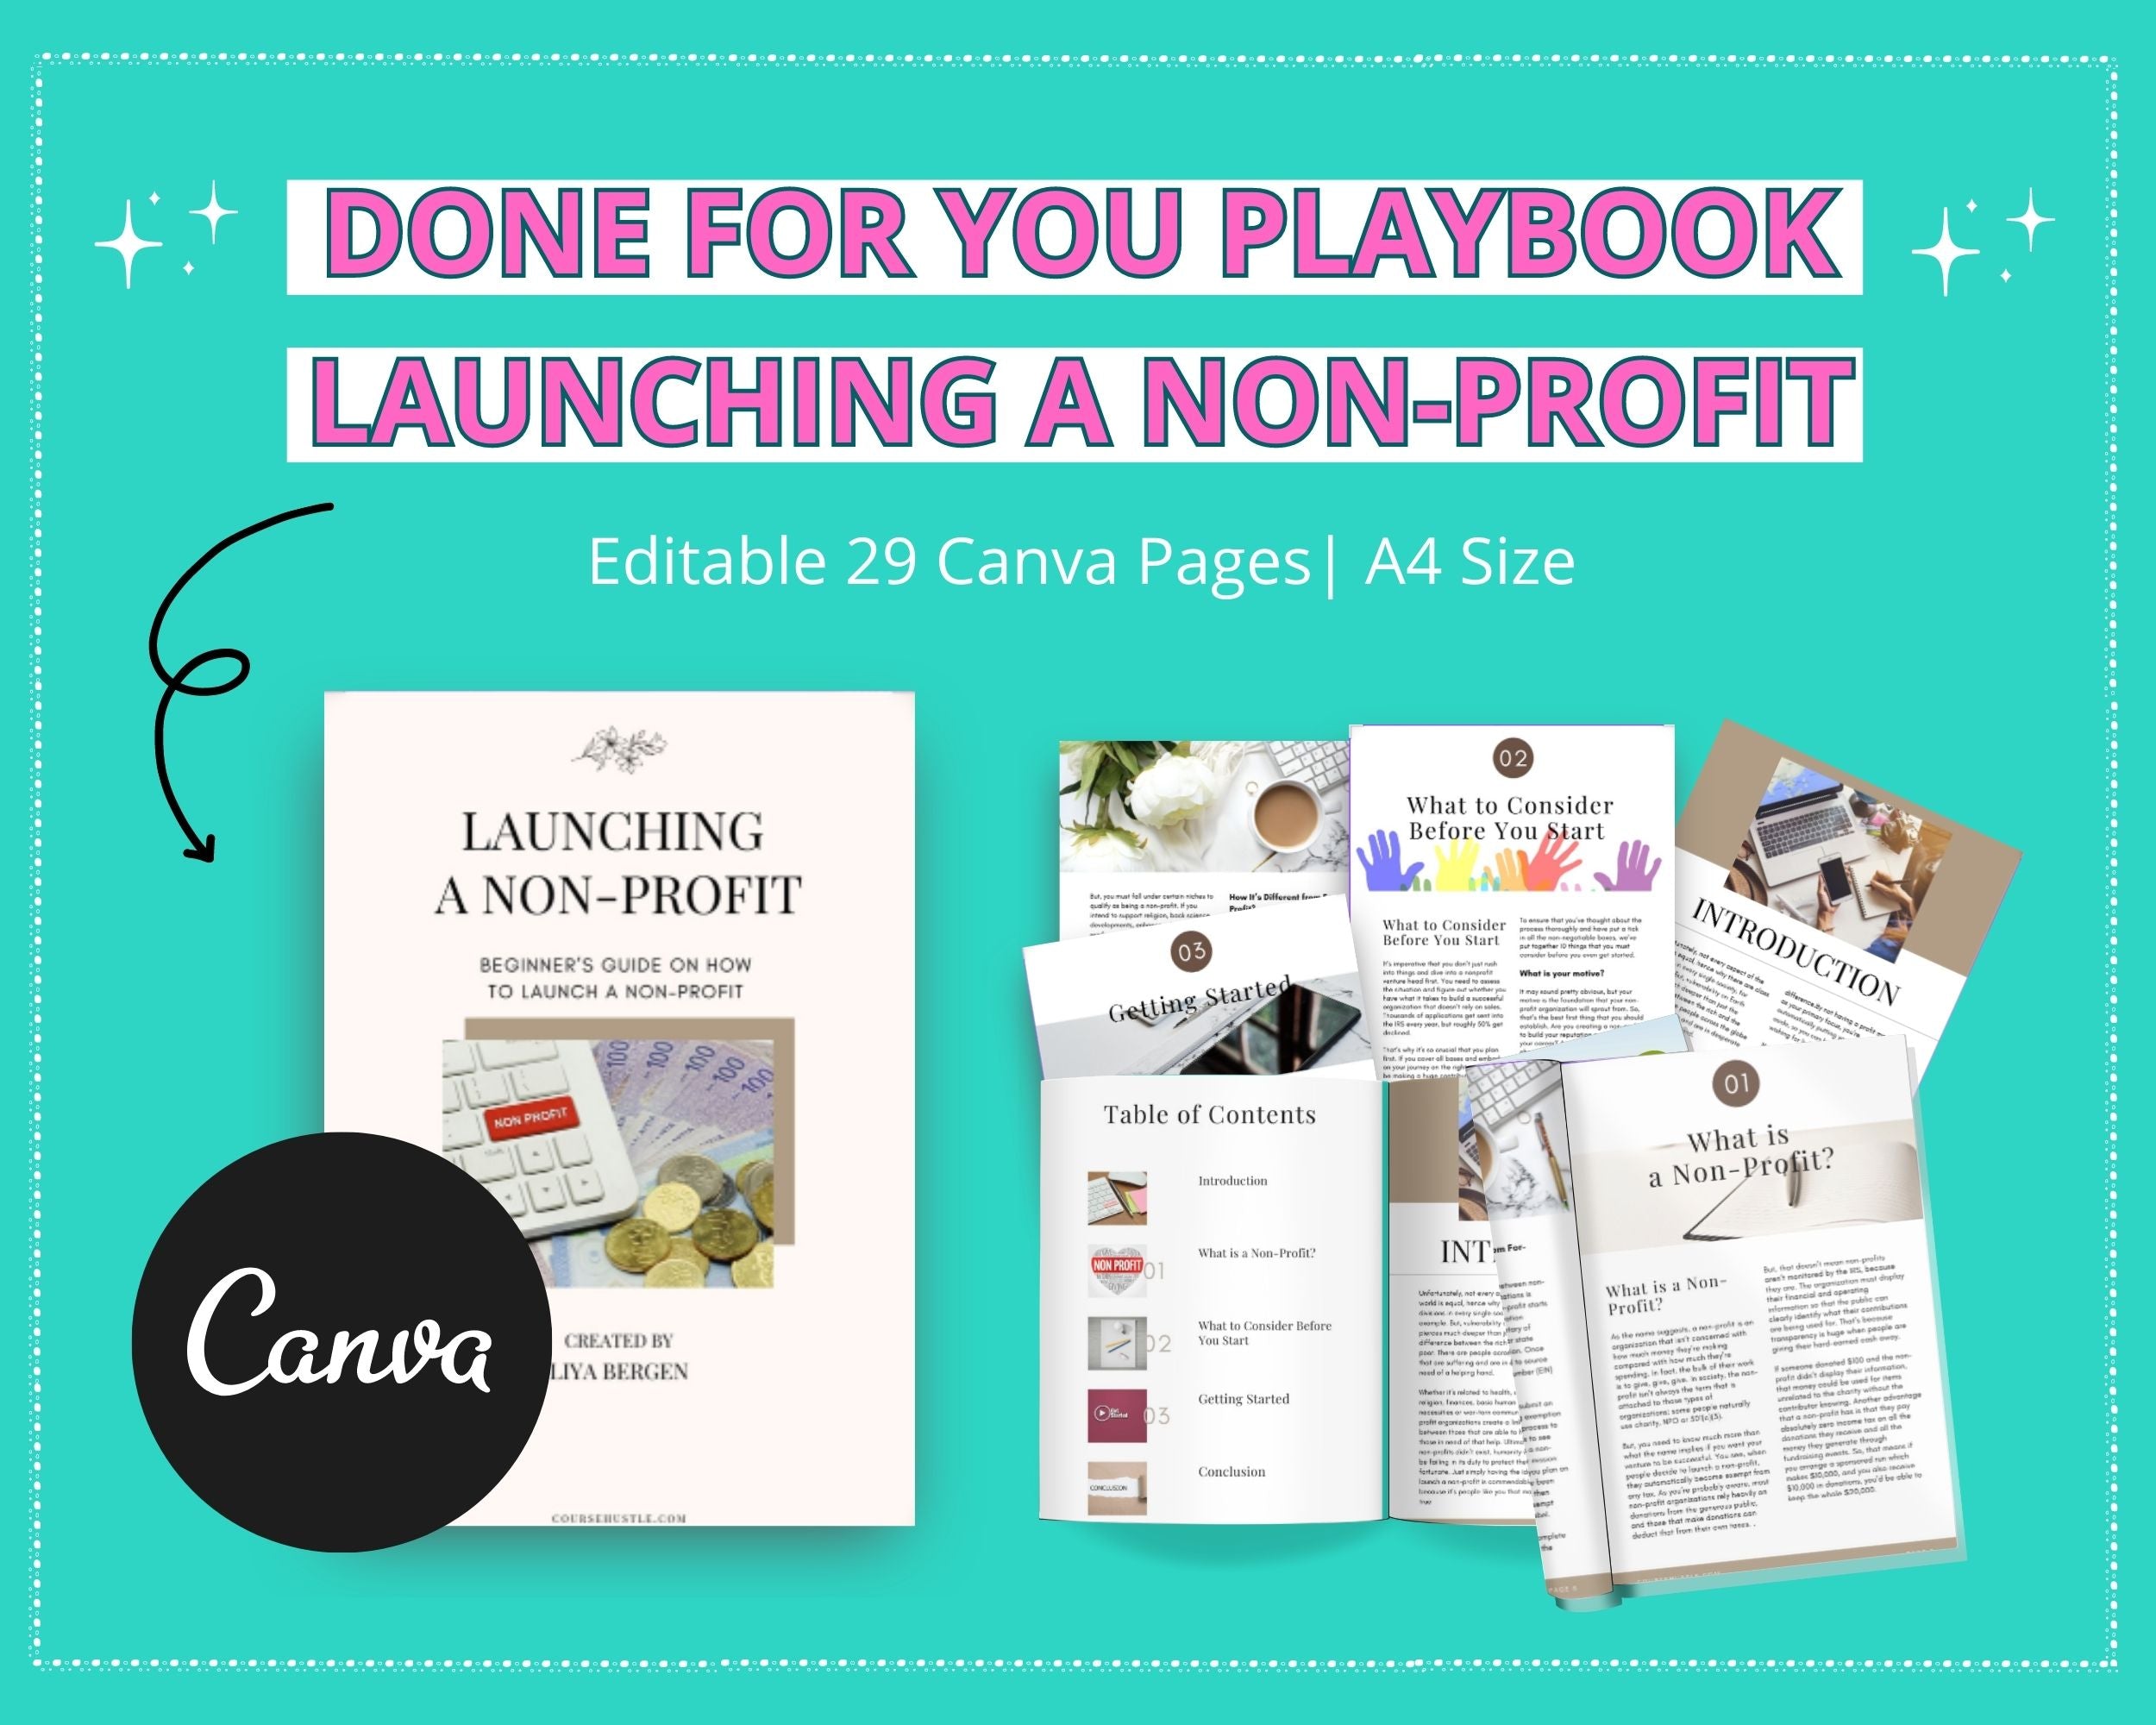 Done for You Launching a Non-Profit Playbook in Canva | Editable A4 Size Canva Template